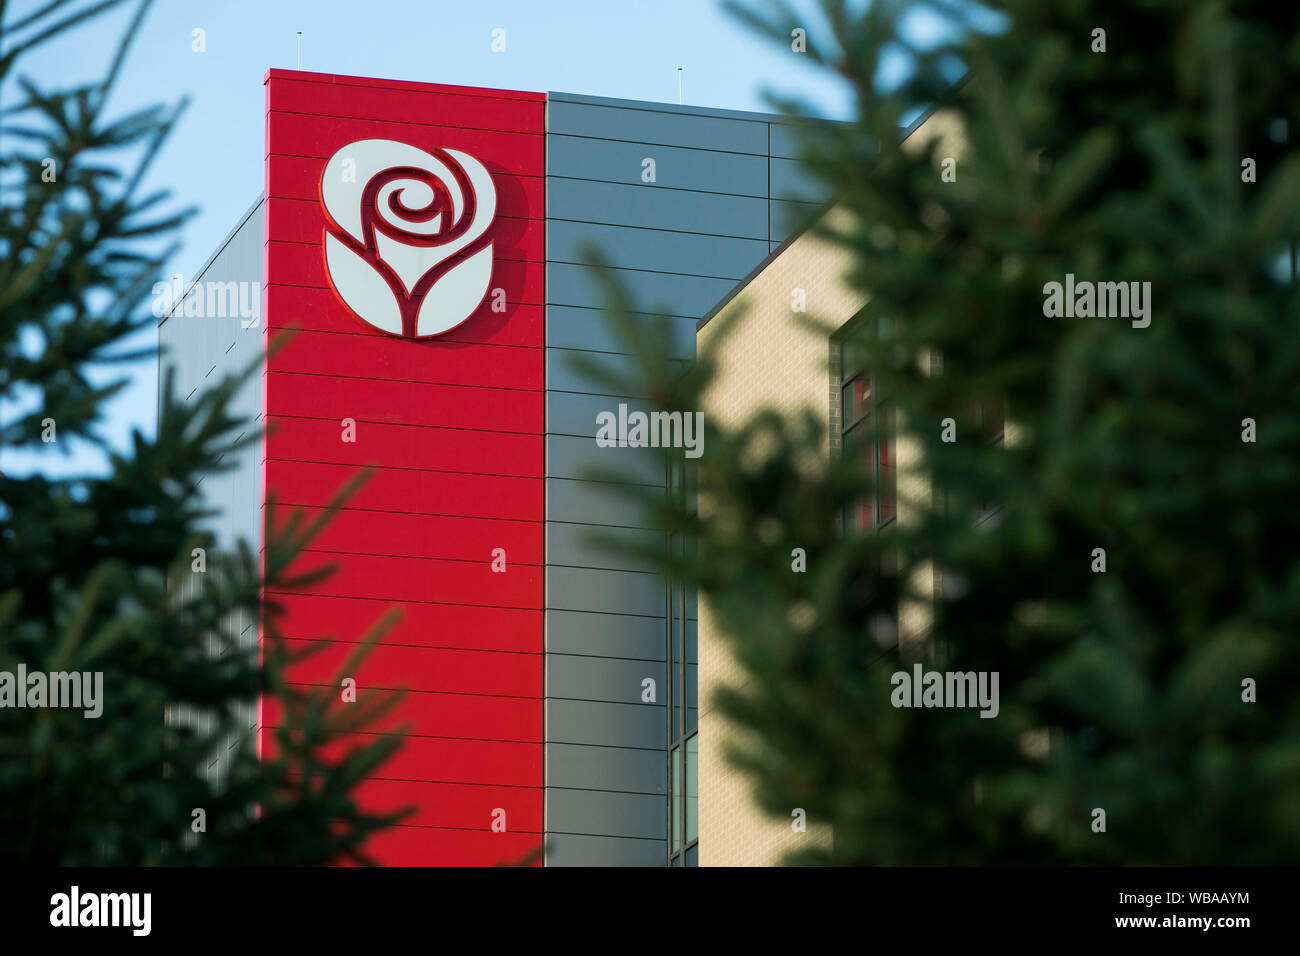 A logo sign outside of the headquarters of the American Greetings Corporation in Westlake, Ohio on August 11, 2019. Stock Photo